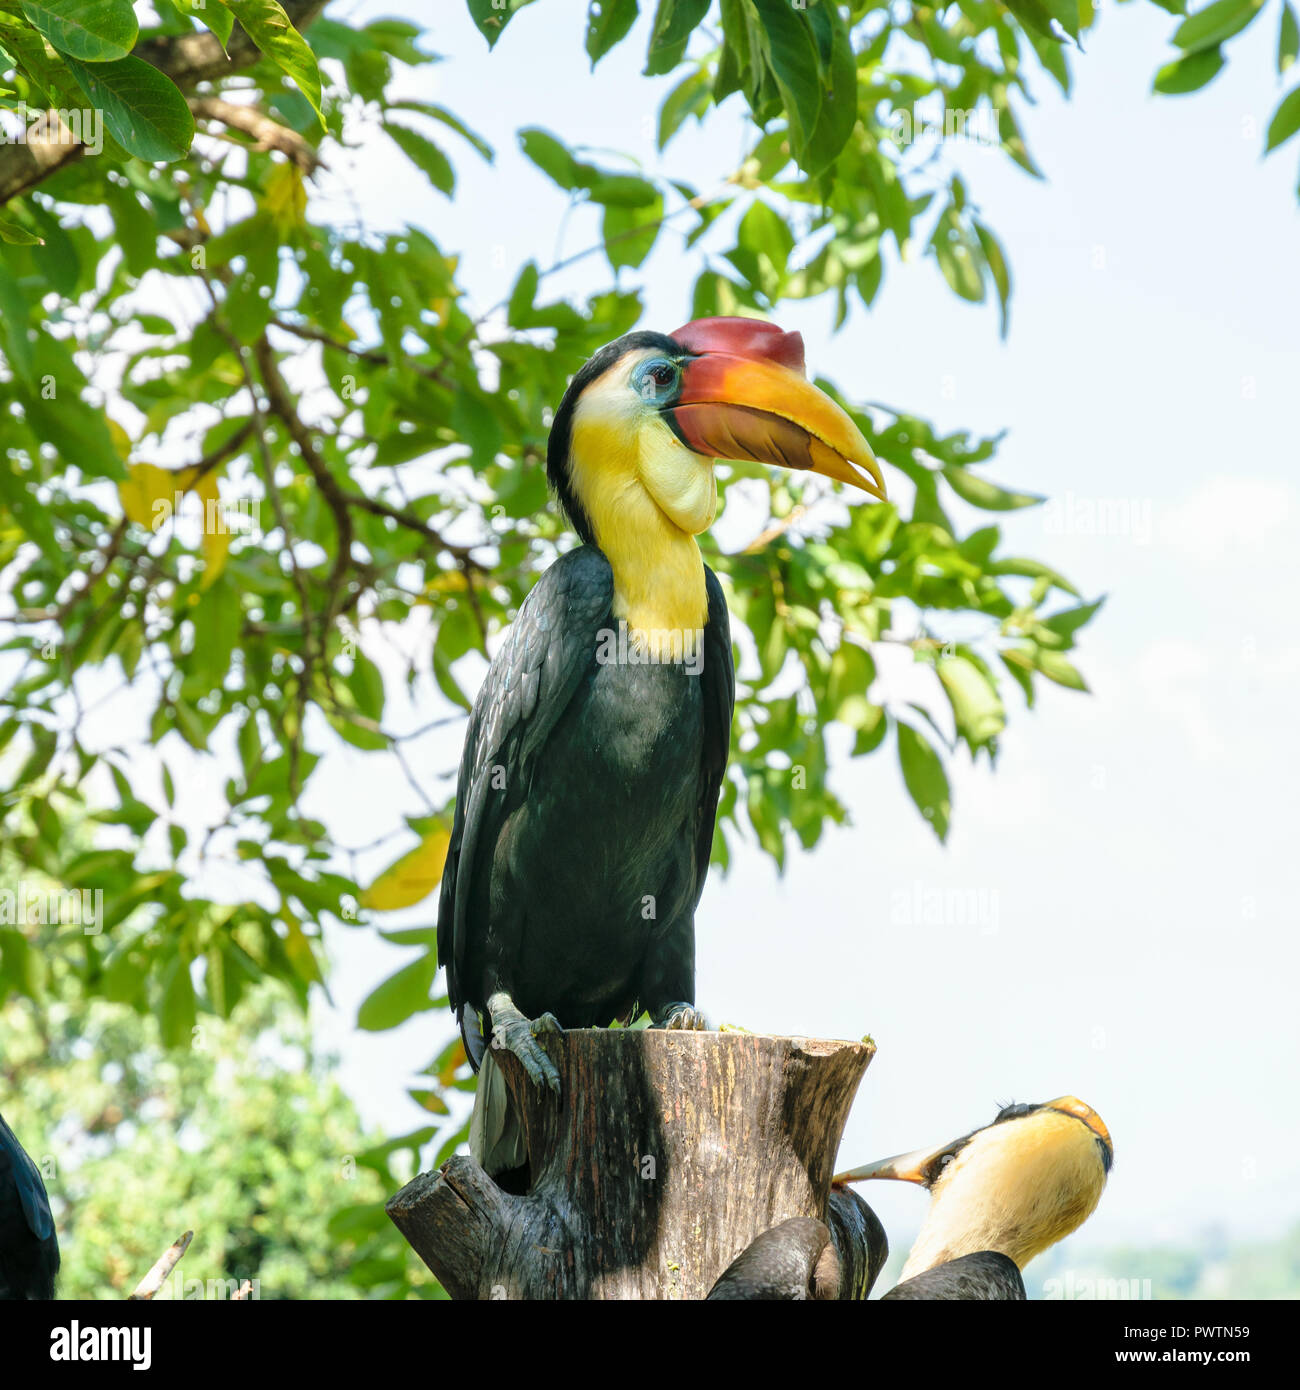 Wrinkled Hornbill, Sunda Wrinkled Hornbill or Aceros Corrugatus. It is a large bird with black feathers and the neck is bright yellow, red casque on t Stock Photo